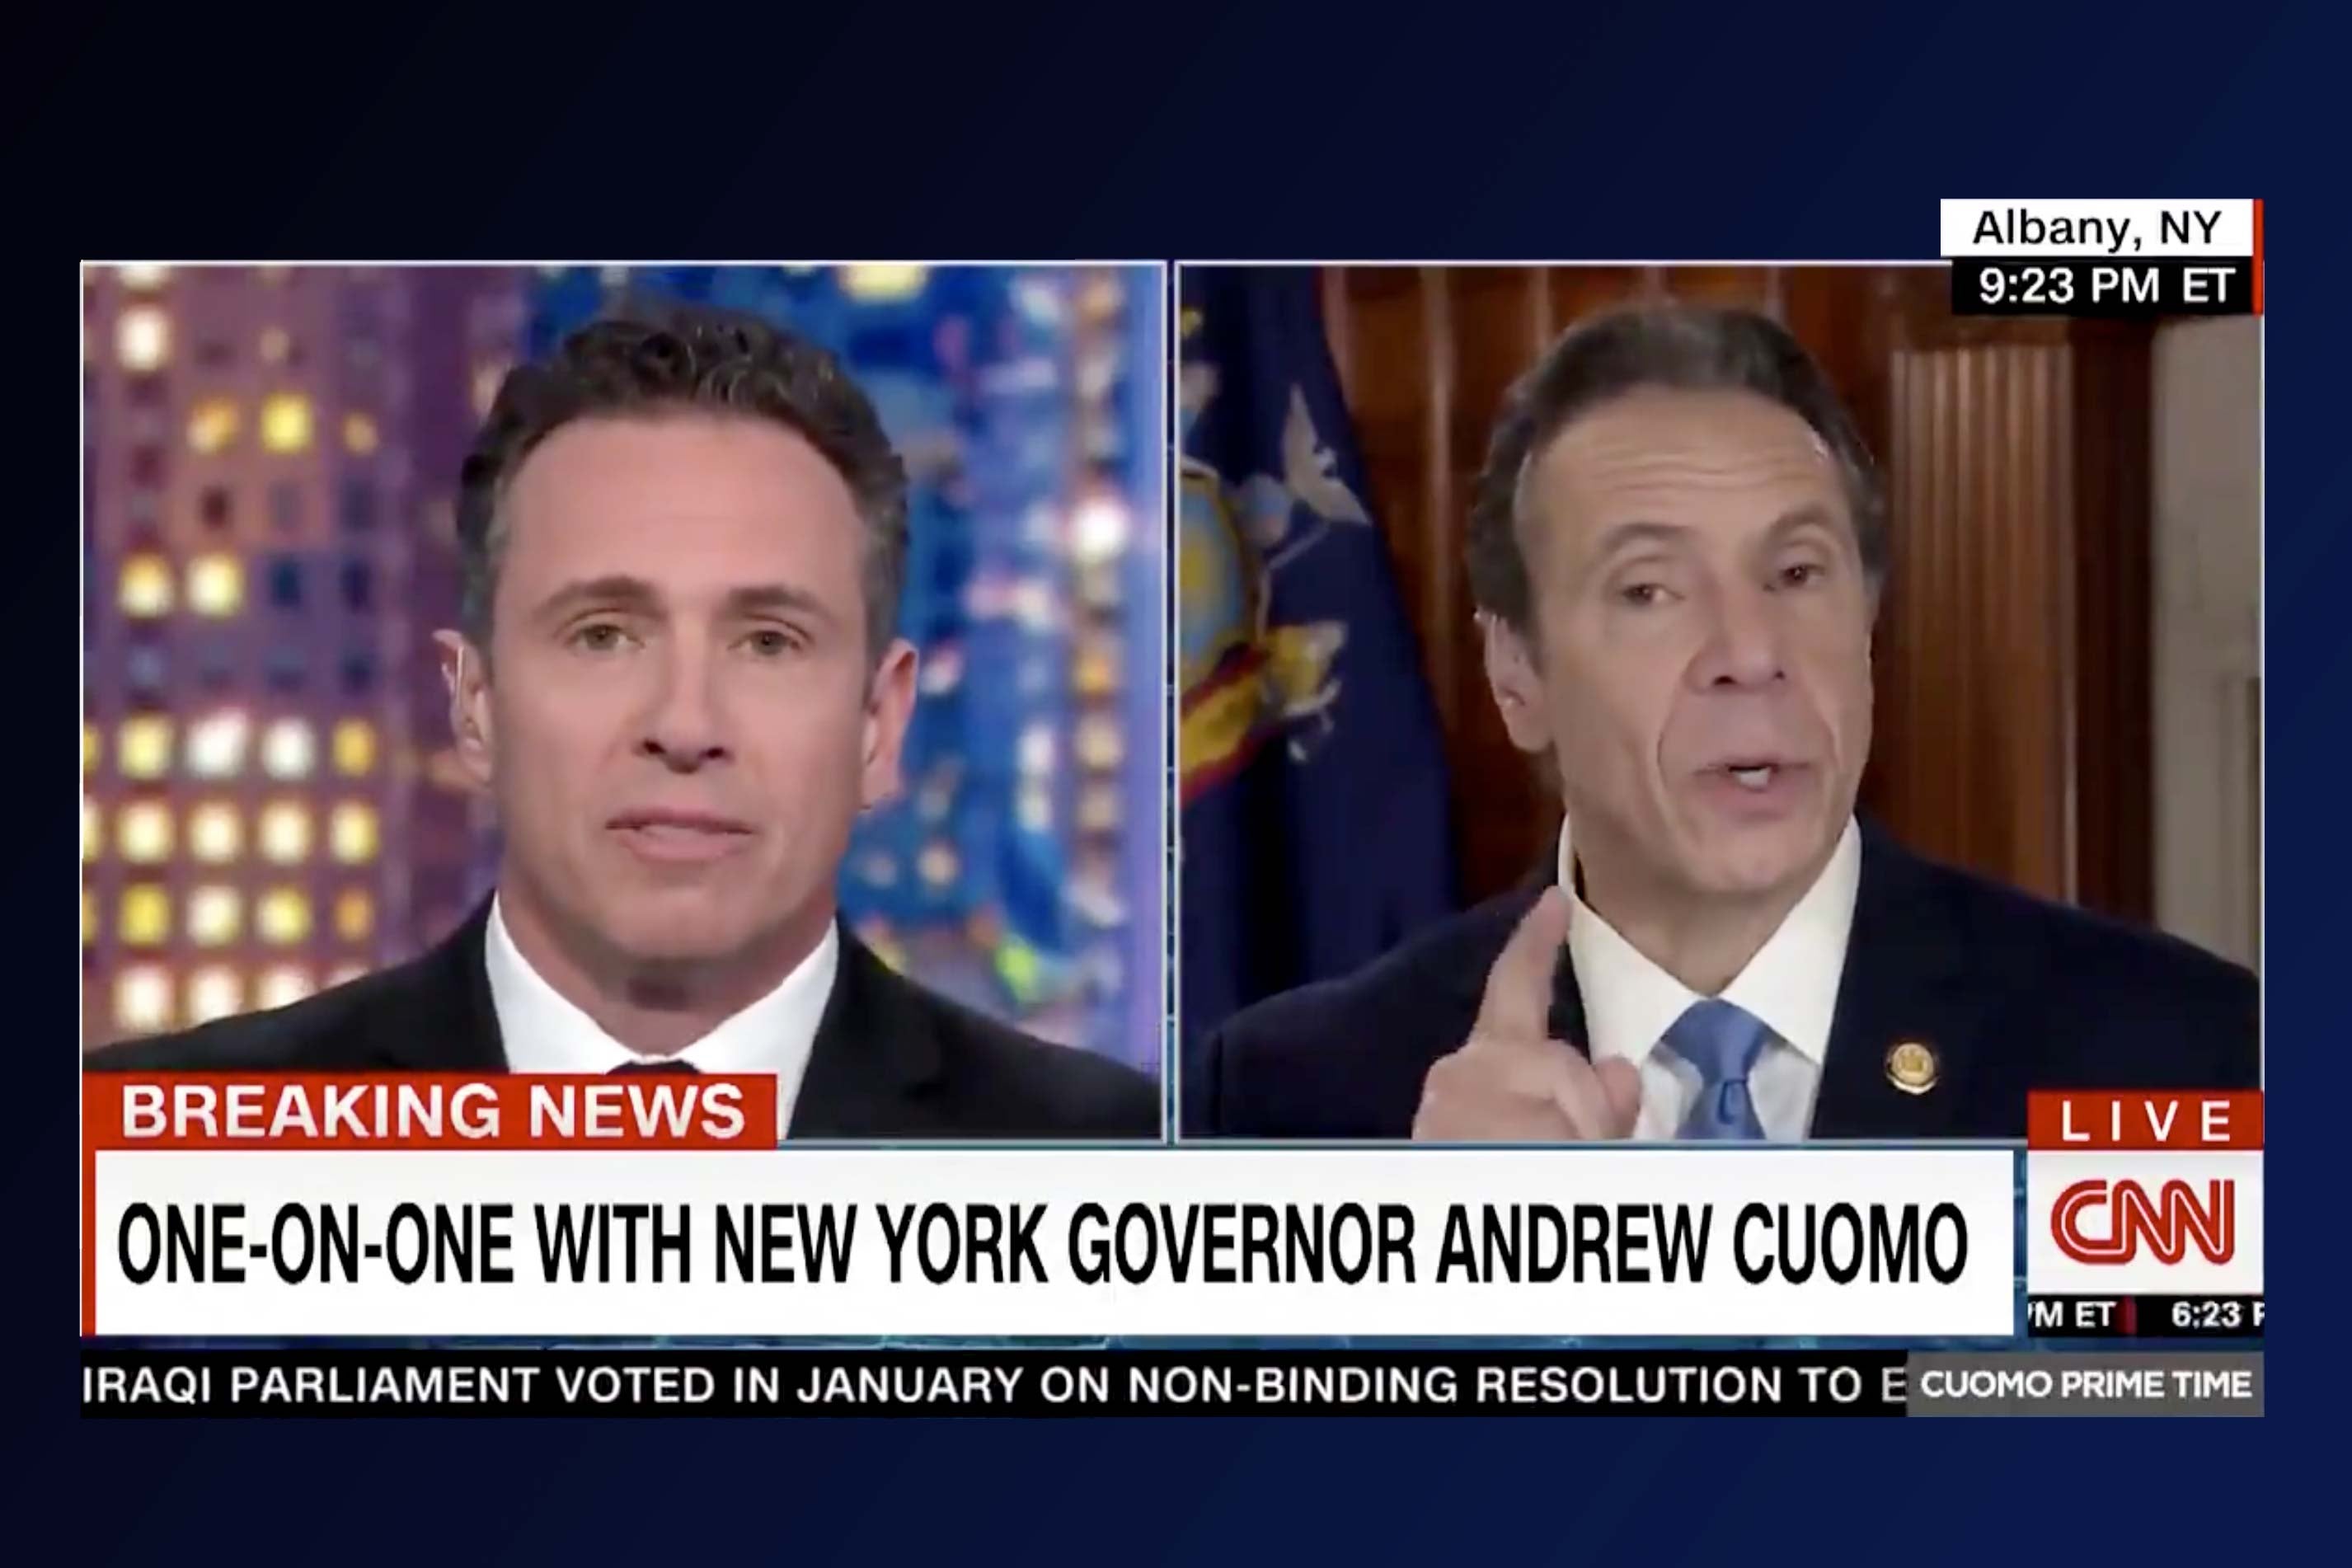 Chris and Andrew Cuomo live in CNN. 